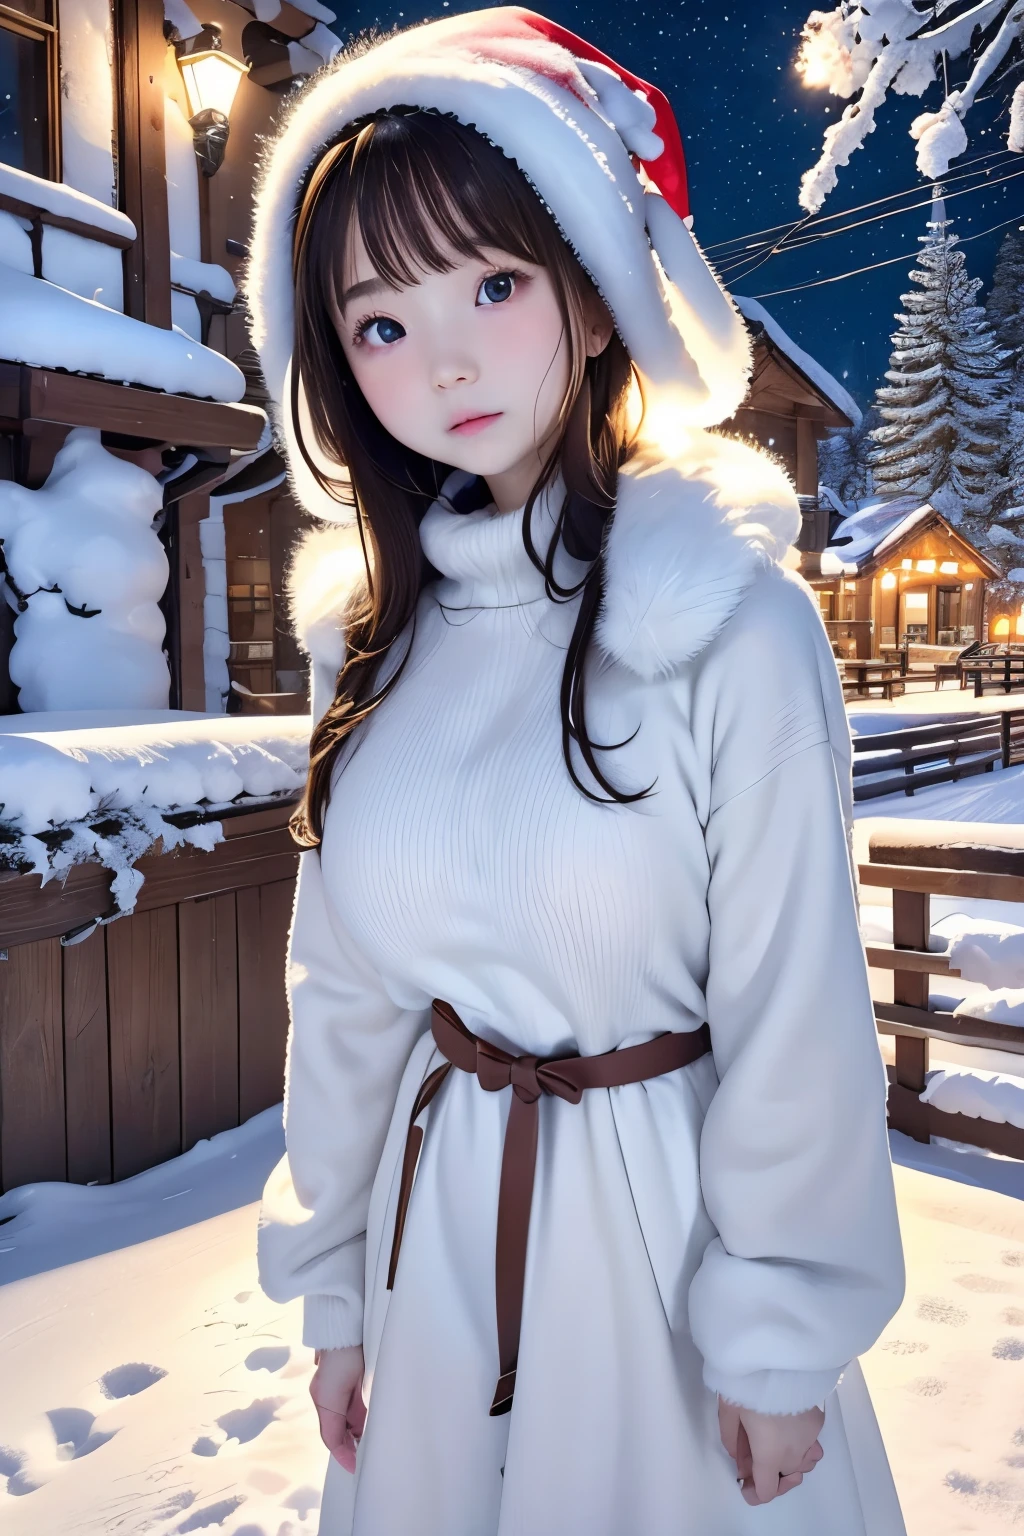 RAW shooting、Photorealsitic、masuter piece、one girls、a baby face、Very cute、Slender and beautiful、((small tits:1.2))、７Head and body、Meticulously drawn eyes、Attractive eyes、Twin-tailed、Breasts like a cutting board、Holy Night、Holy Night、Starry sky、It's snowing、Fashionable winter clothes、Eskimo、Frigid winter、snowscape、white Christmas、Christmas tree、Christmas Colors、